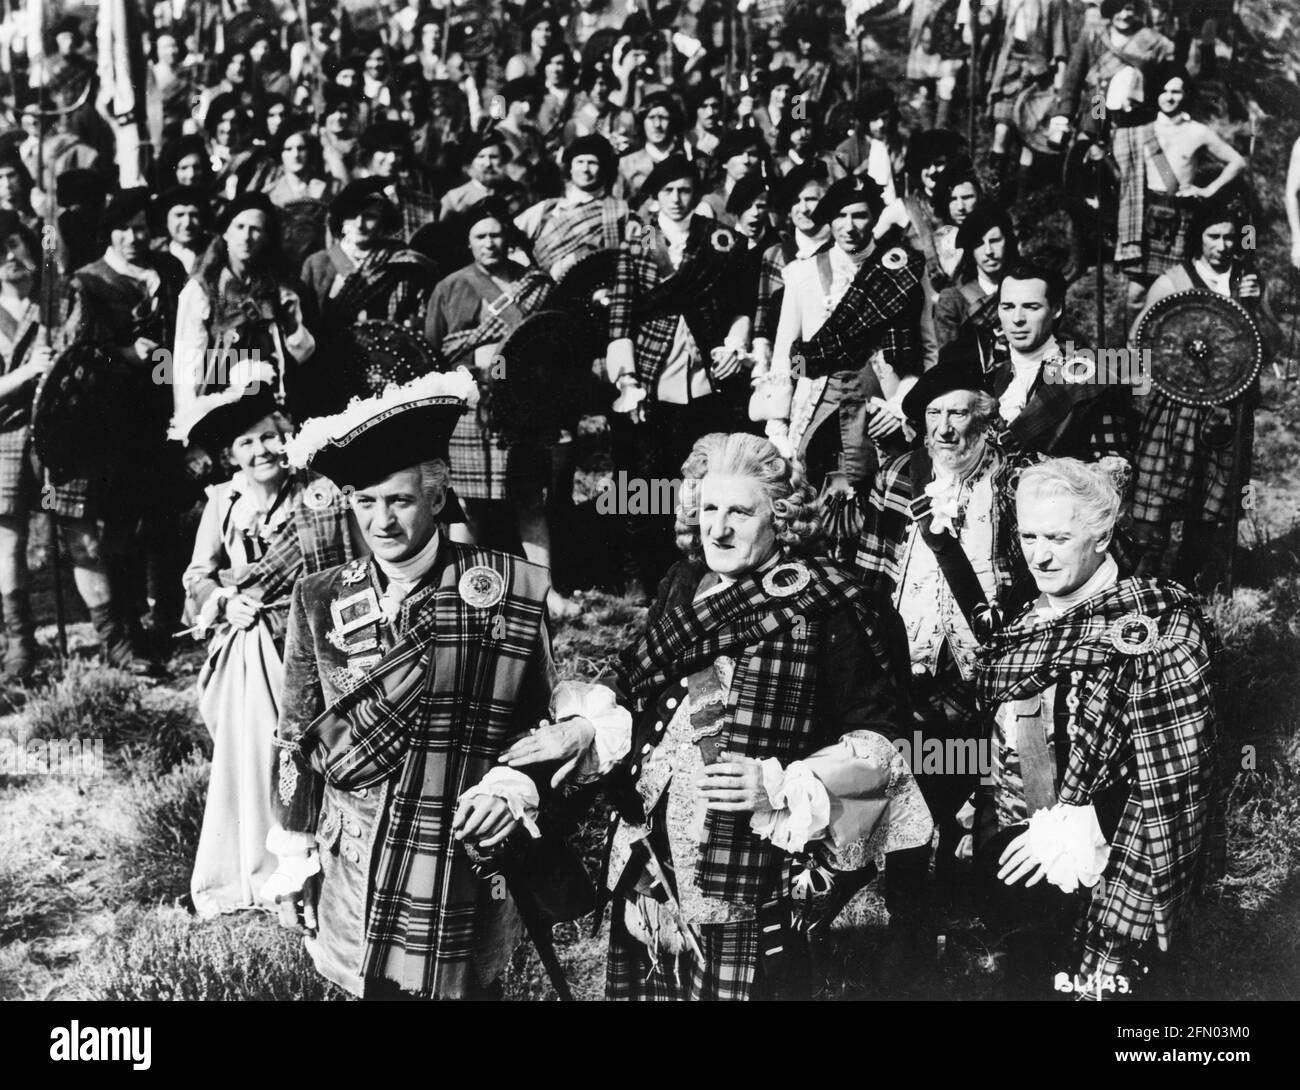 Bonnie Prince Charlie (1948) David Niven, Finlay Currie, Date: 1948 Banque D'Images